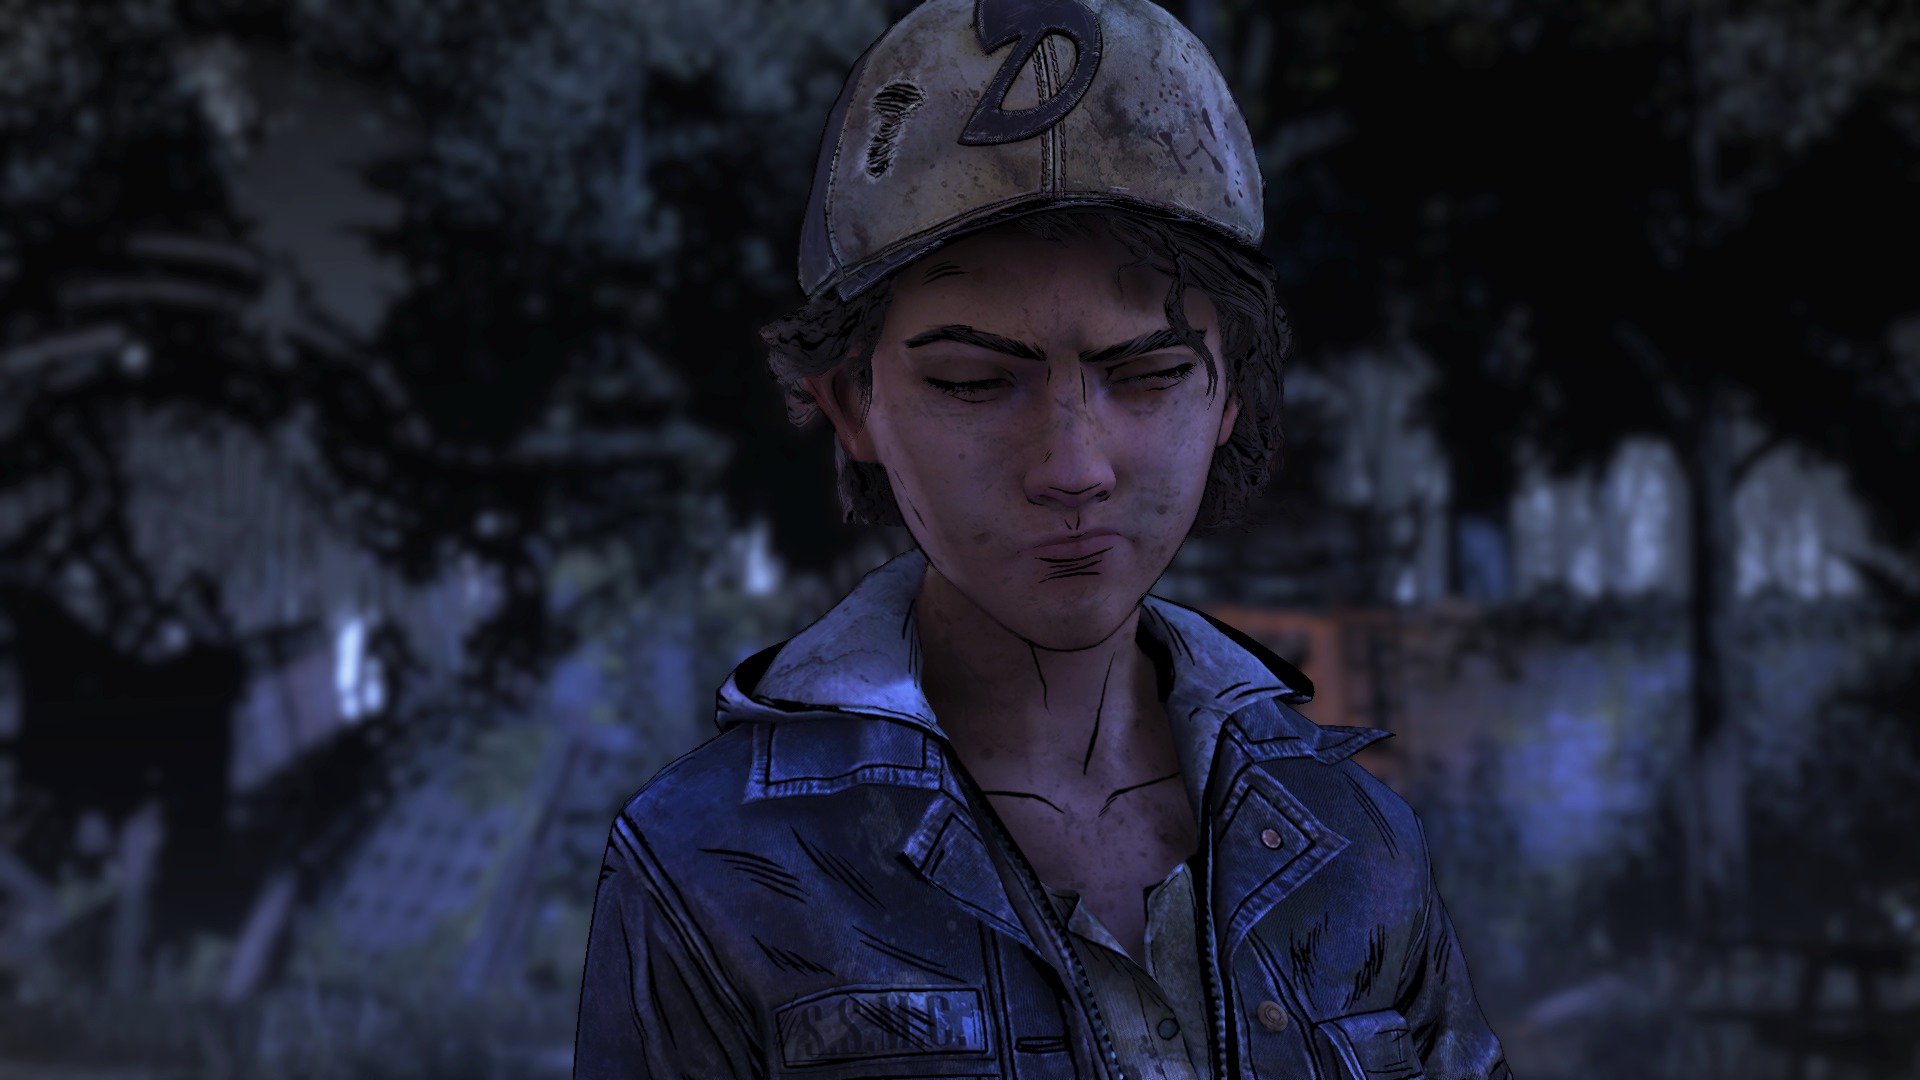 wallpapers of clem twd